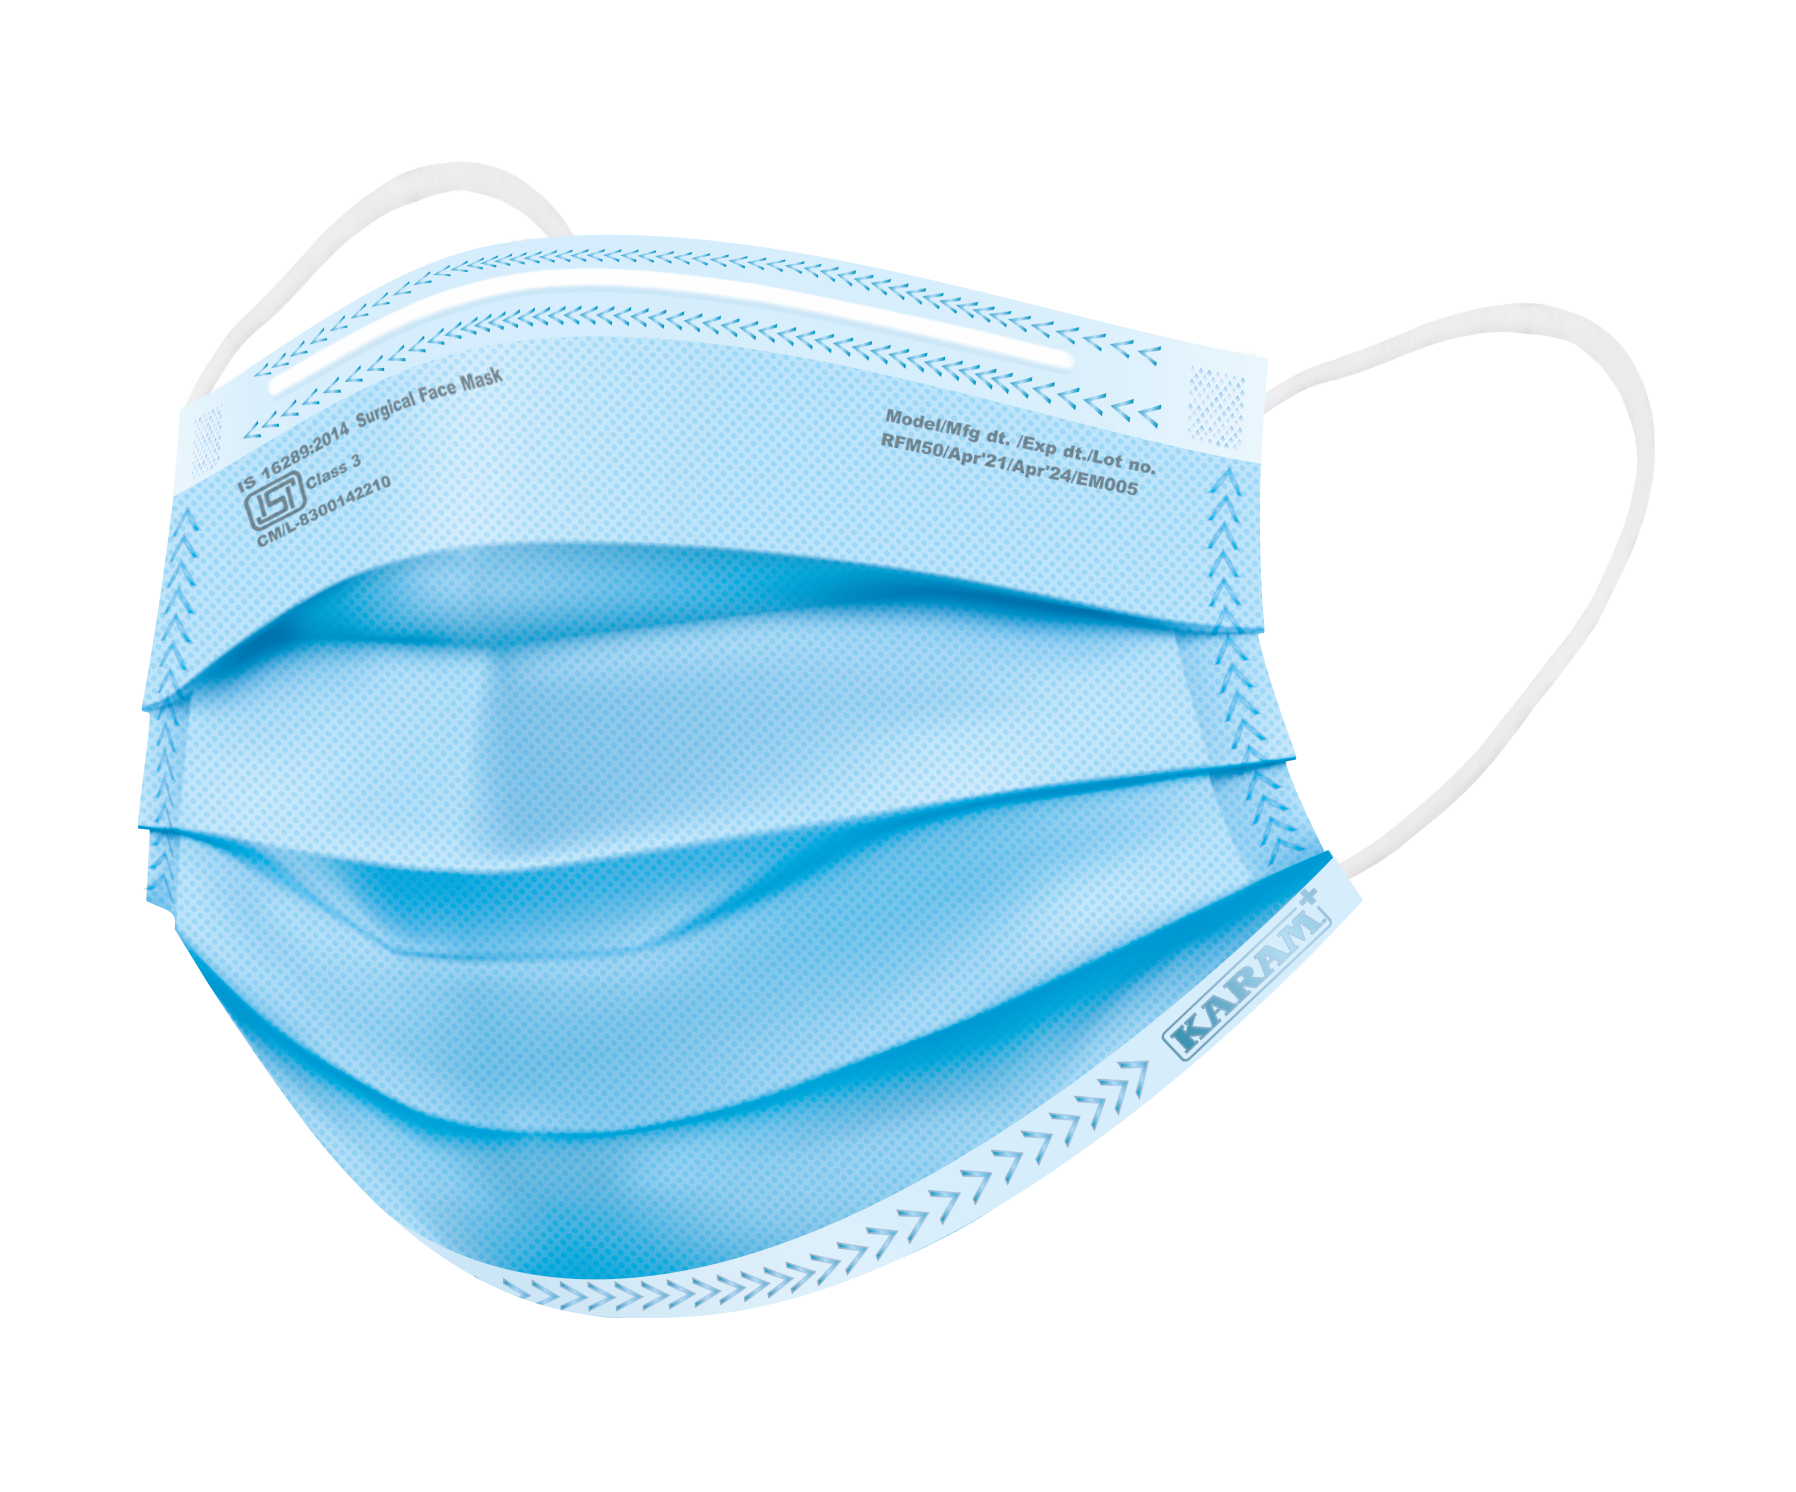 KARAM Industries diversifies its healthcare portfolio with Surgical Face Mask